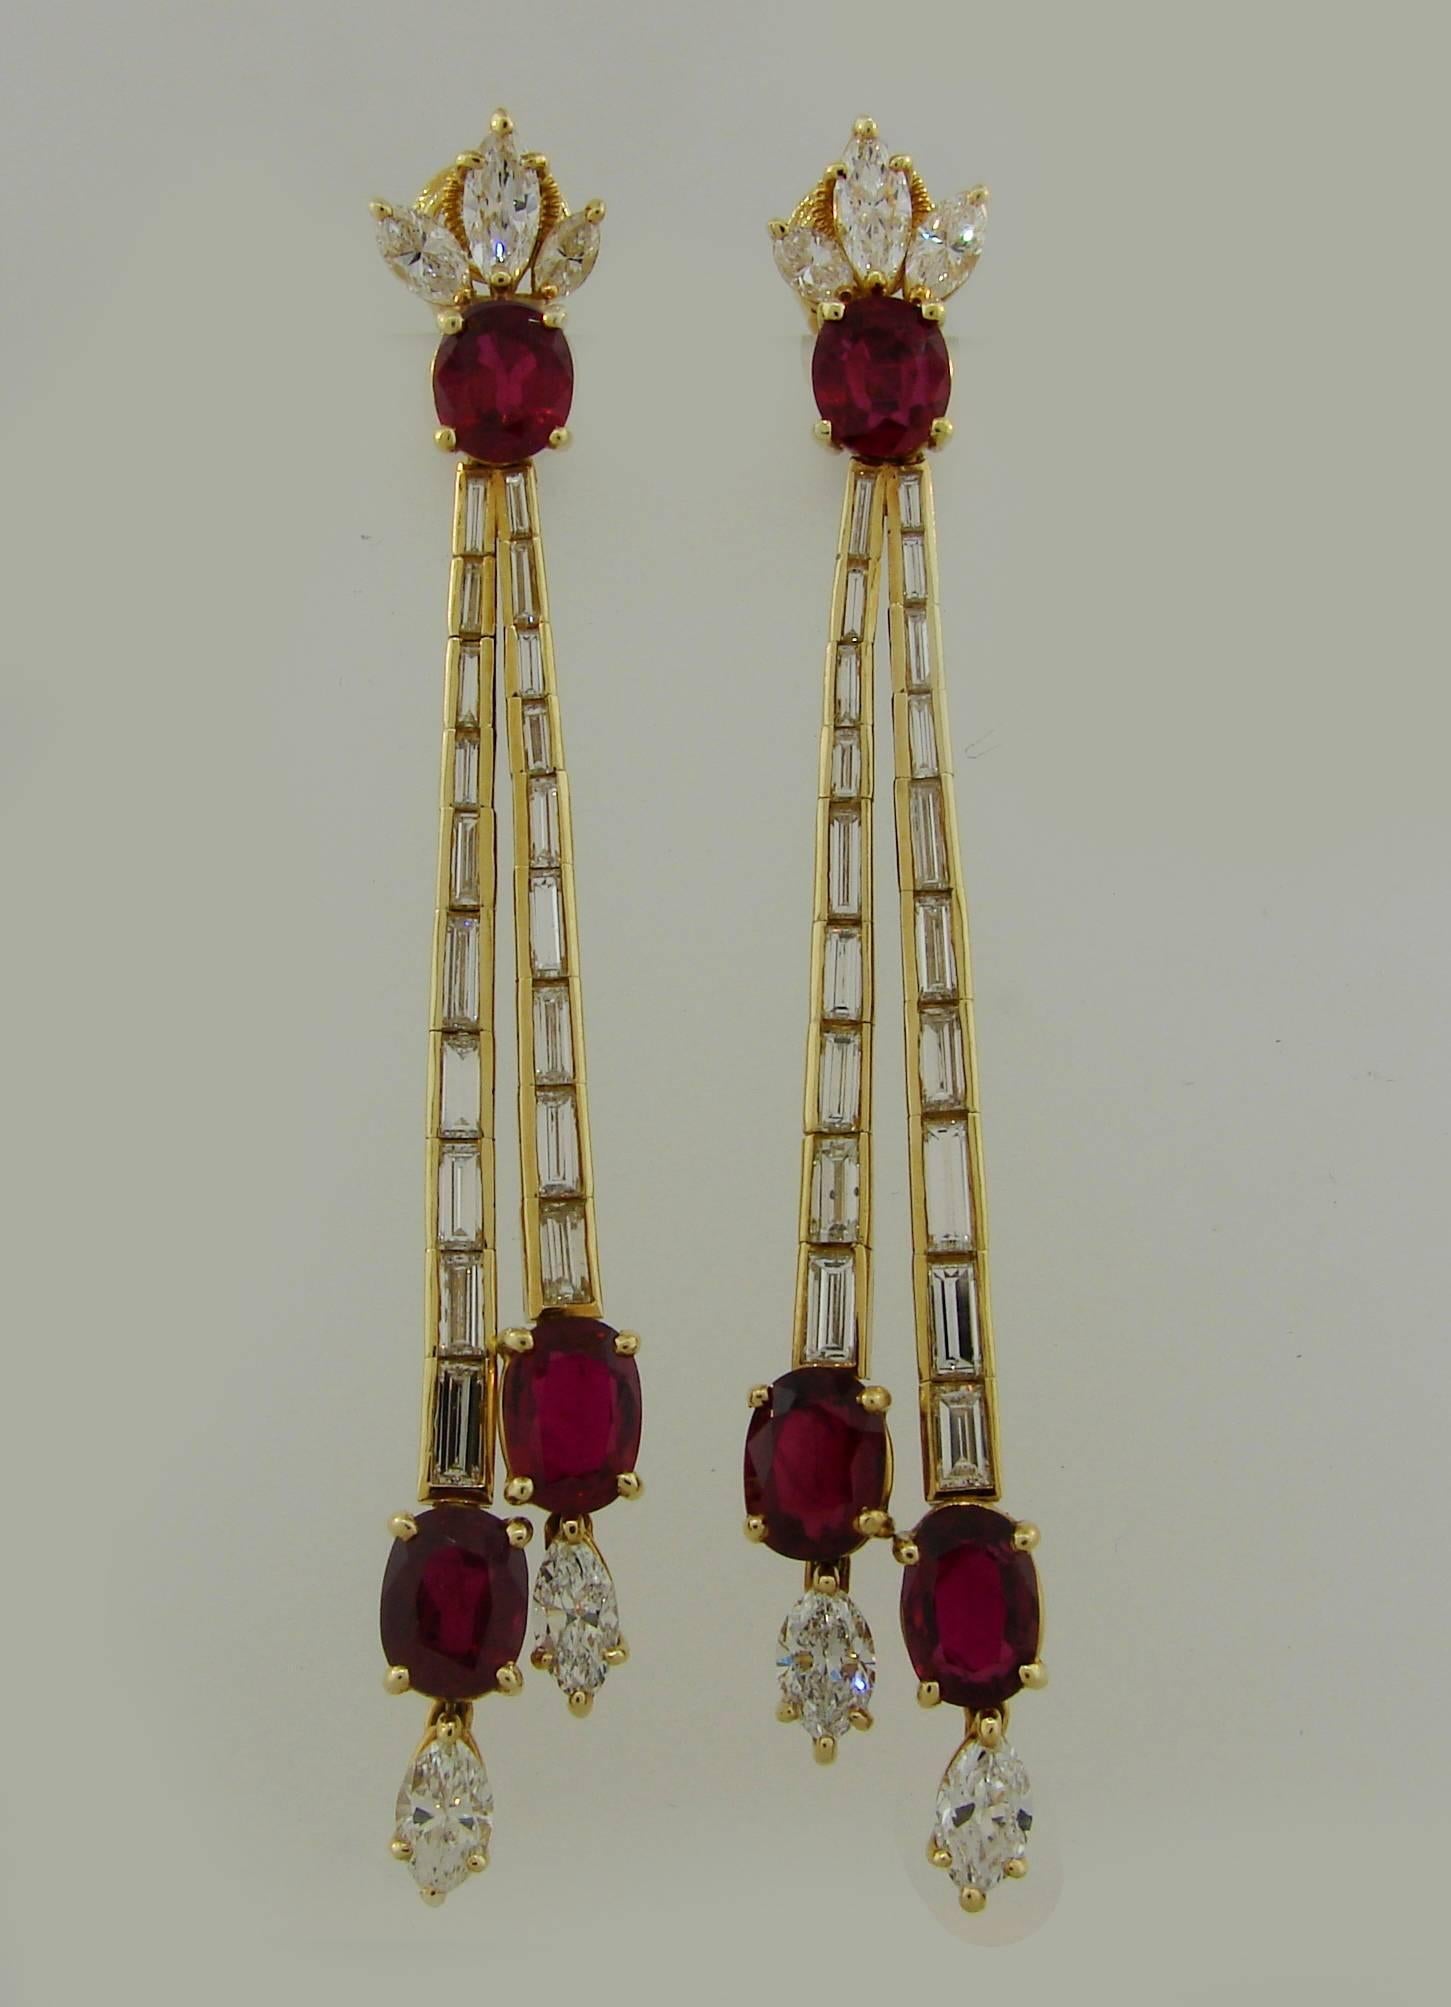 Stunning elegant earrings. The earrings are made of 18 karat (stamped) yellow gold, oval faceted ruby and marquise and baguette cut diamonds. Diamond total weight  approximately 4.38 carats, ruby total weight approximately 10.36 carats. They measure